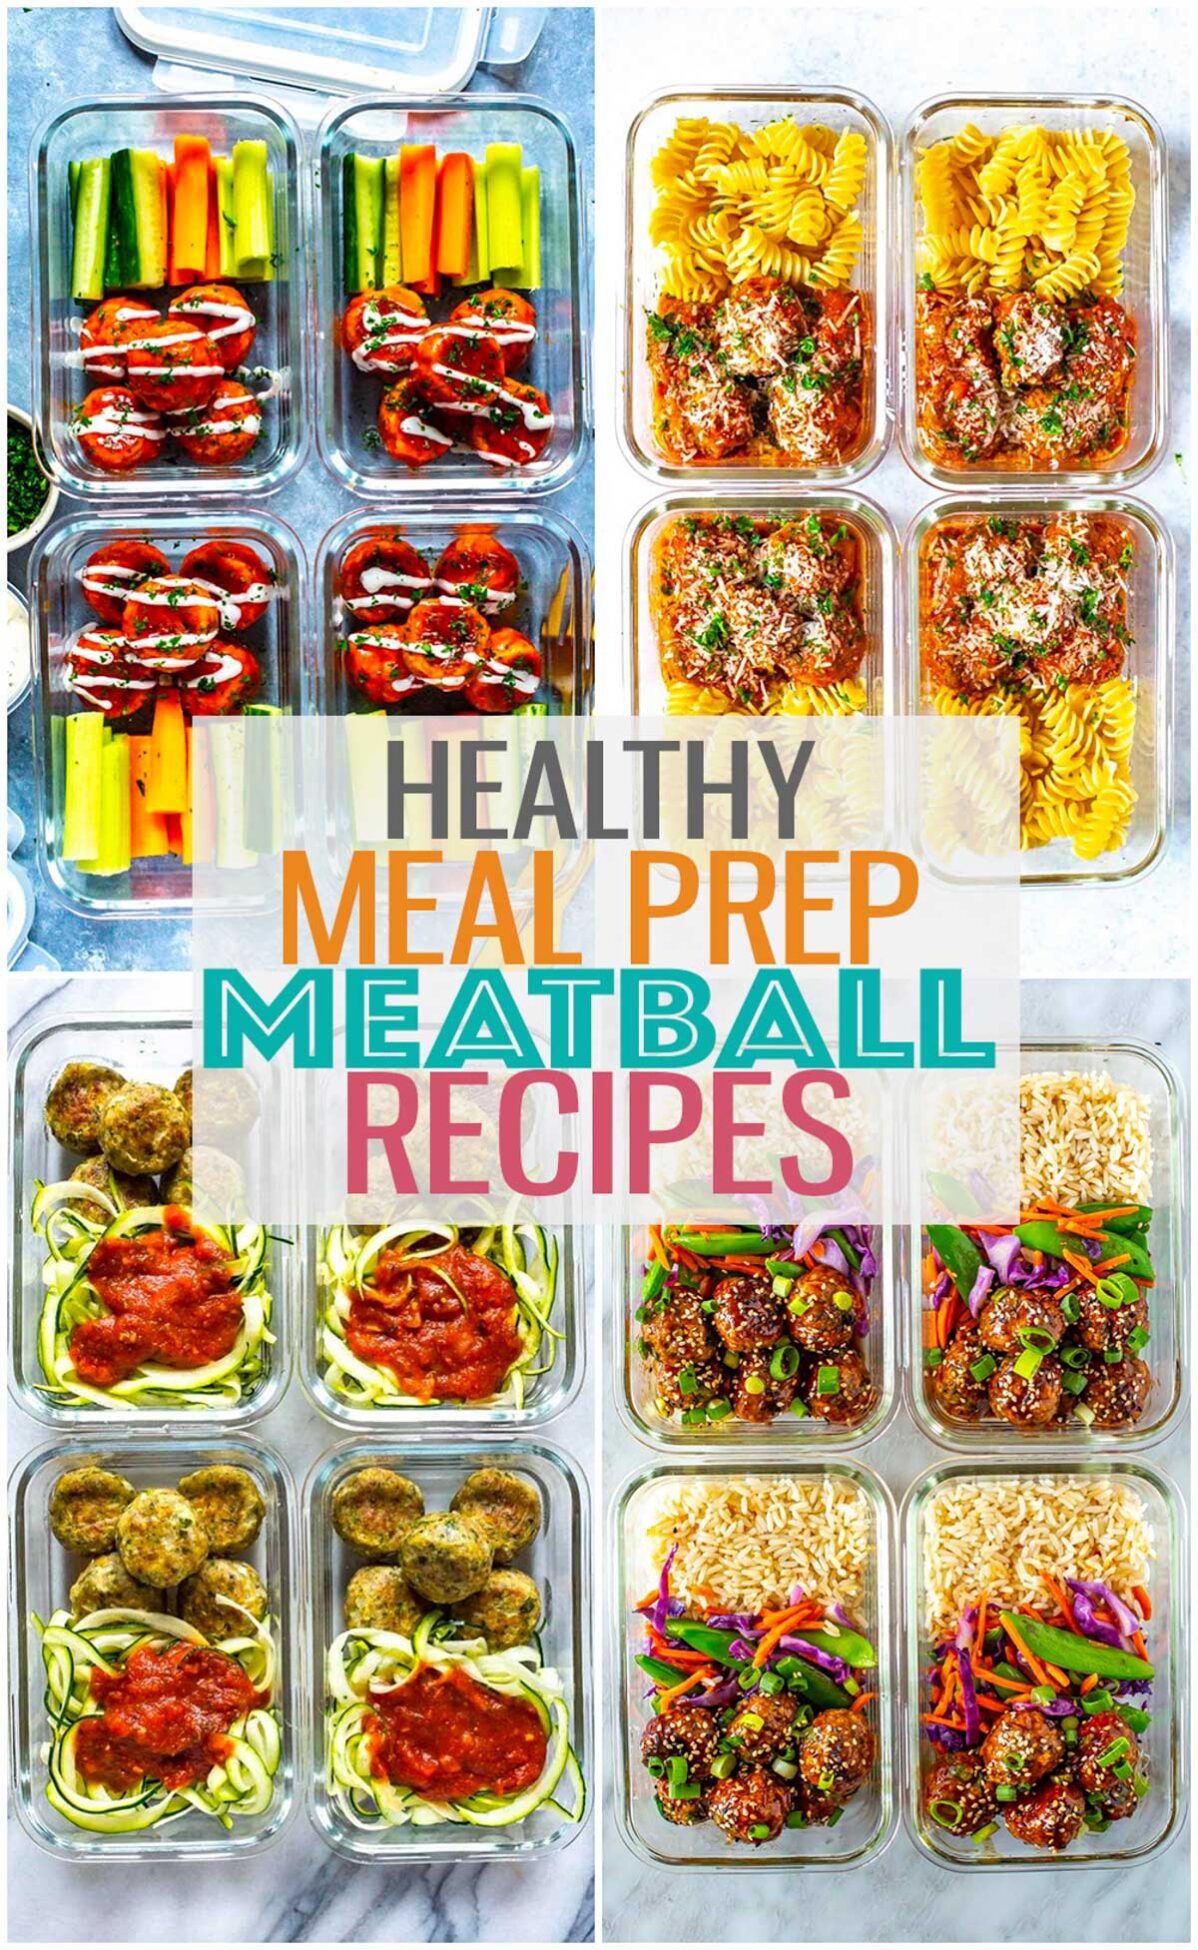 Four different meatball recipes with the text "Healthy meal prep meatball recipes" layered over top.